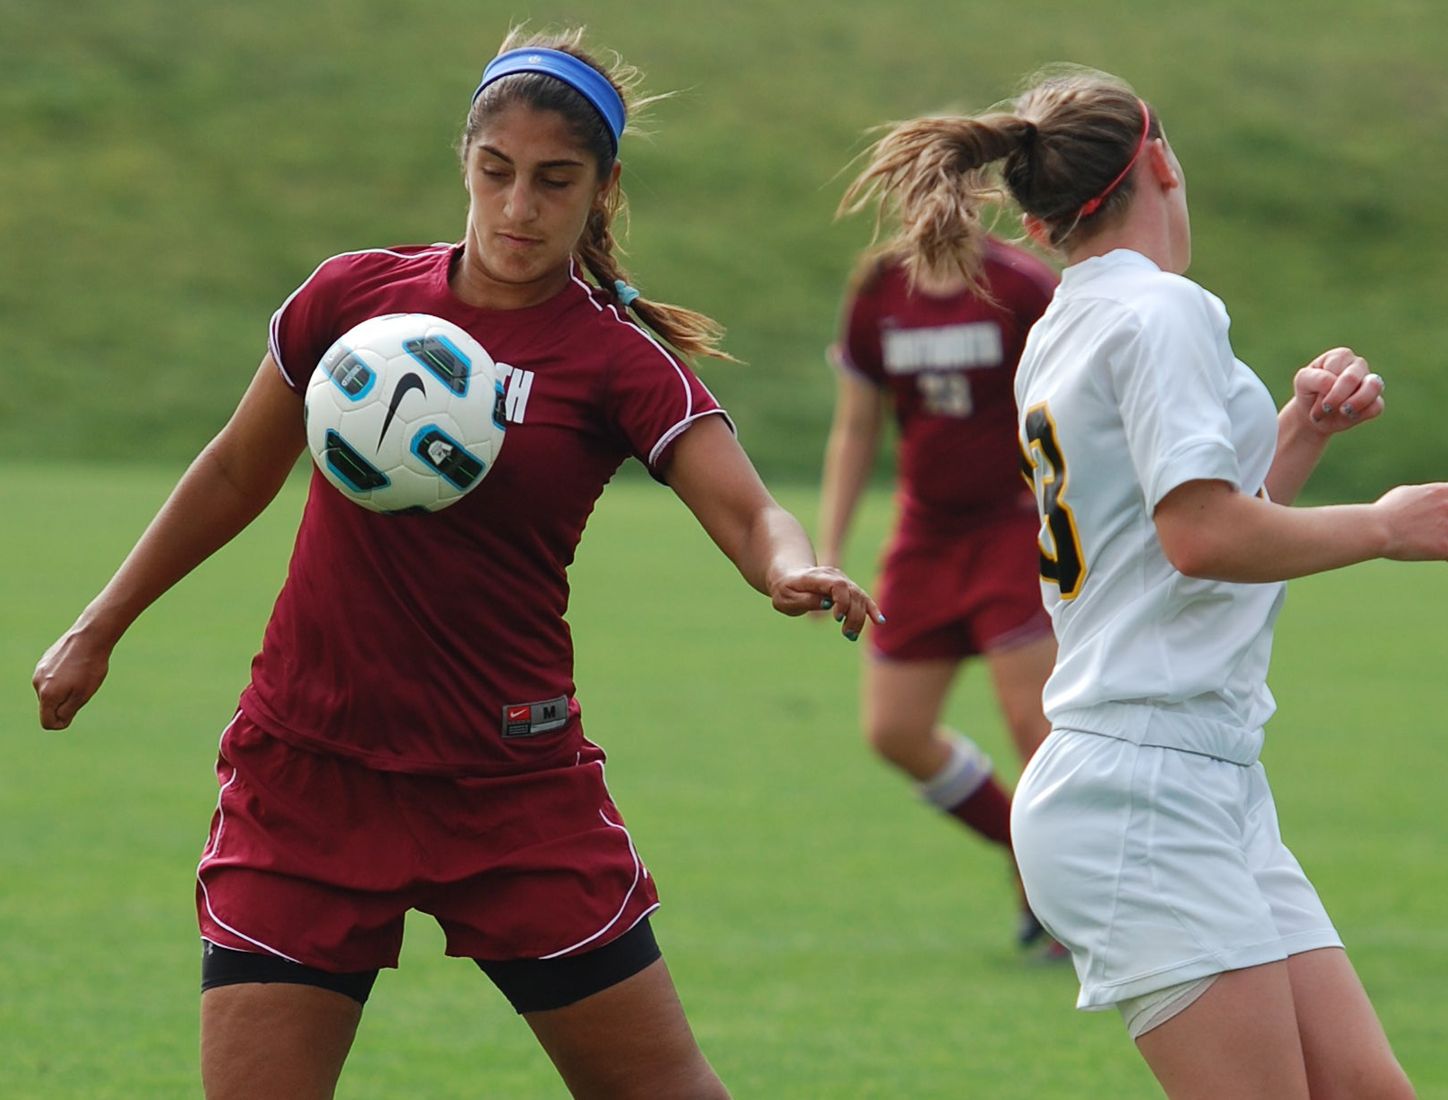 Whitworth University's Anisa Babar, of Vancouver, left, was named Northwest Conference Defender of the Year and First Team All-West Region for NCAA Division III by the National Soccer Coaches Association of America. She is a three-time All-NWC selection, including back-to-back First Team honors.